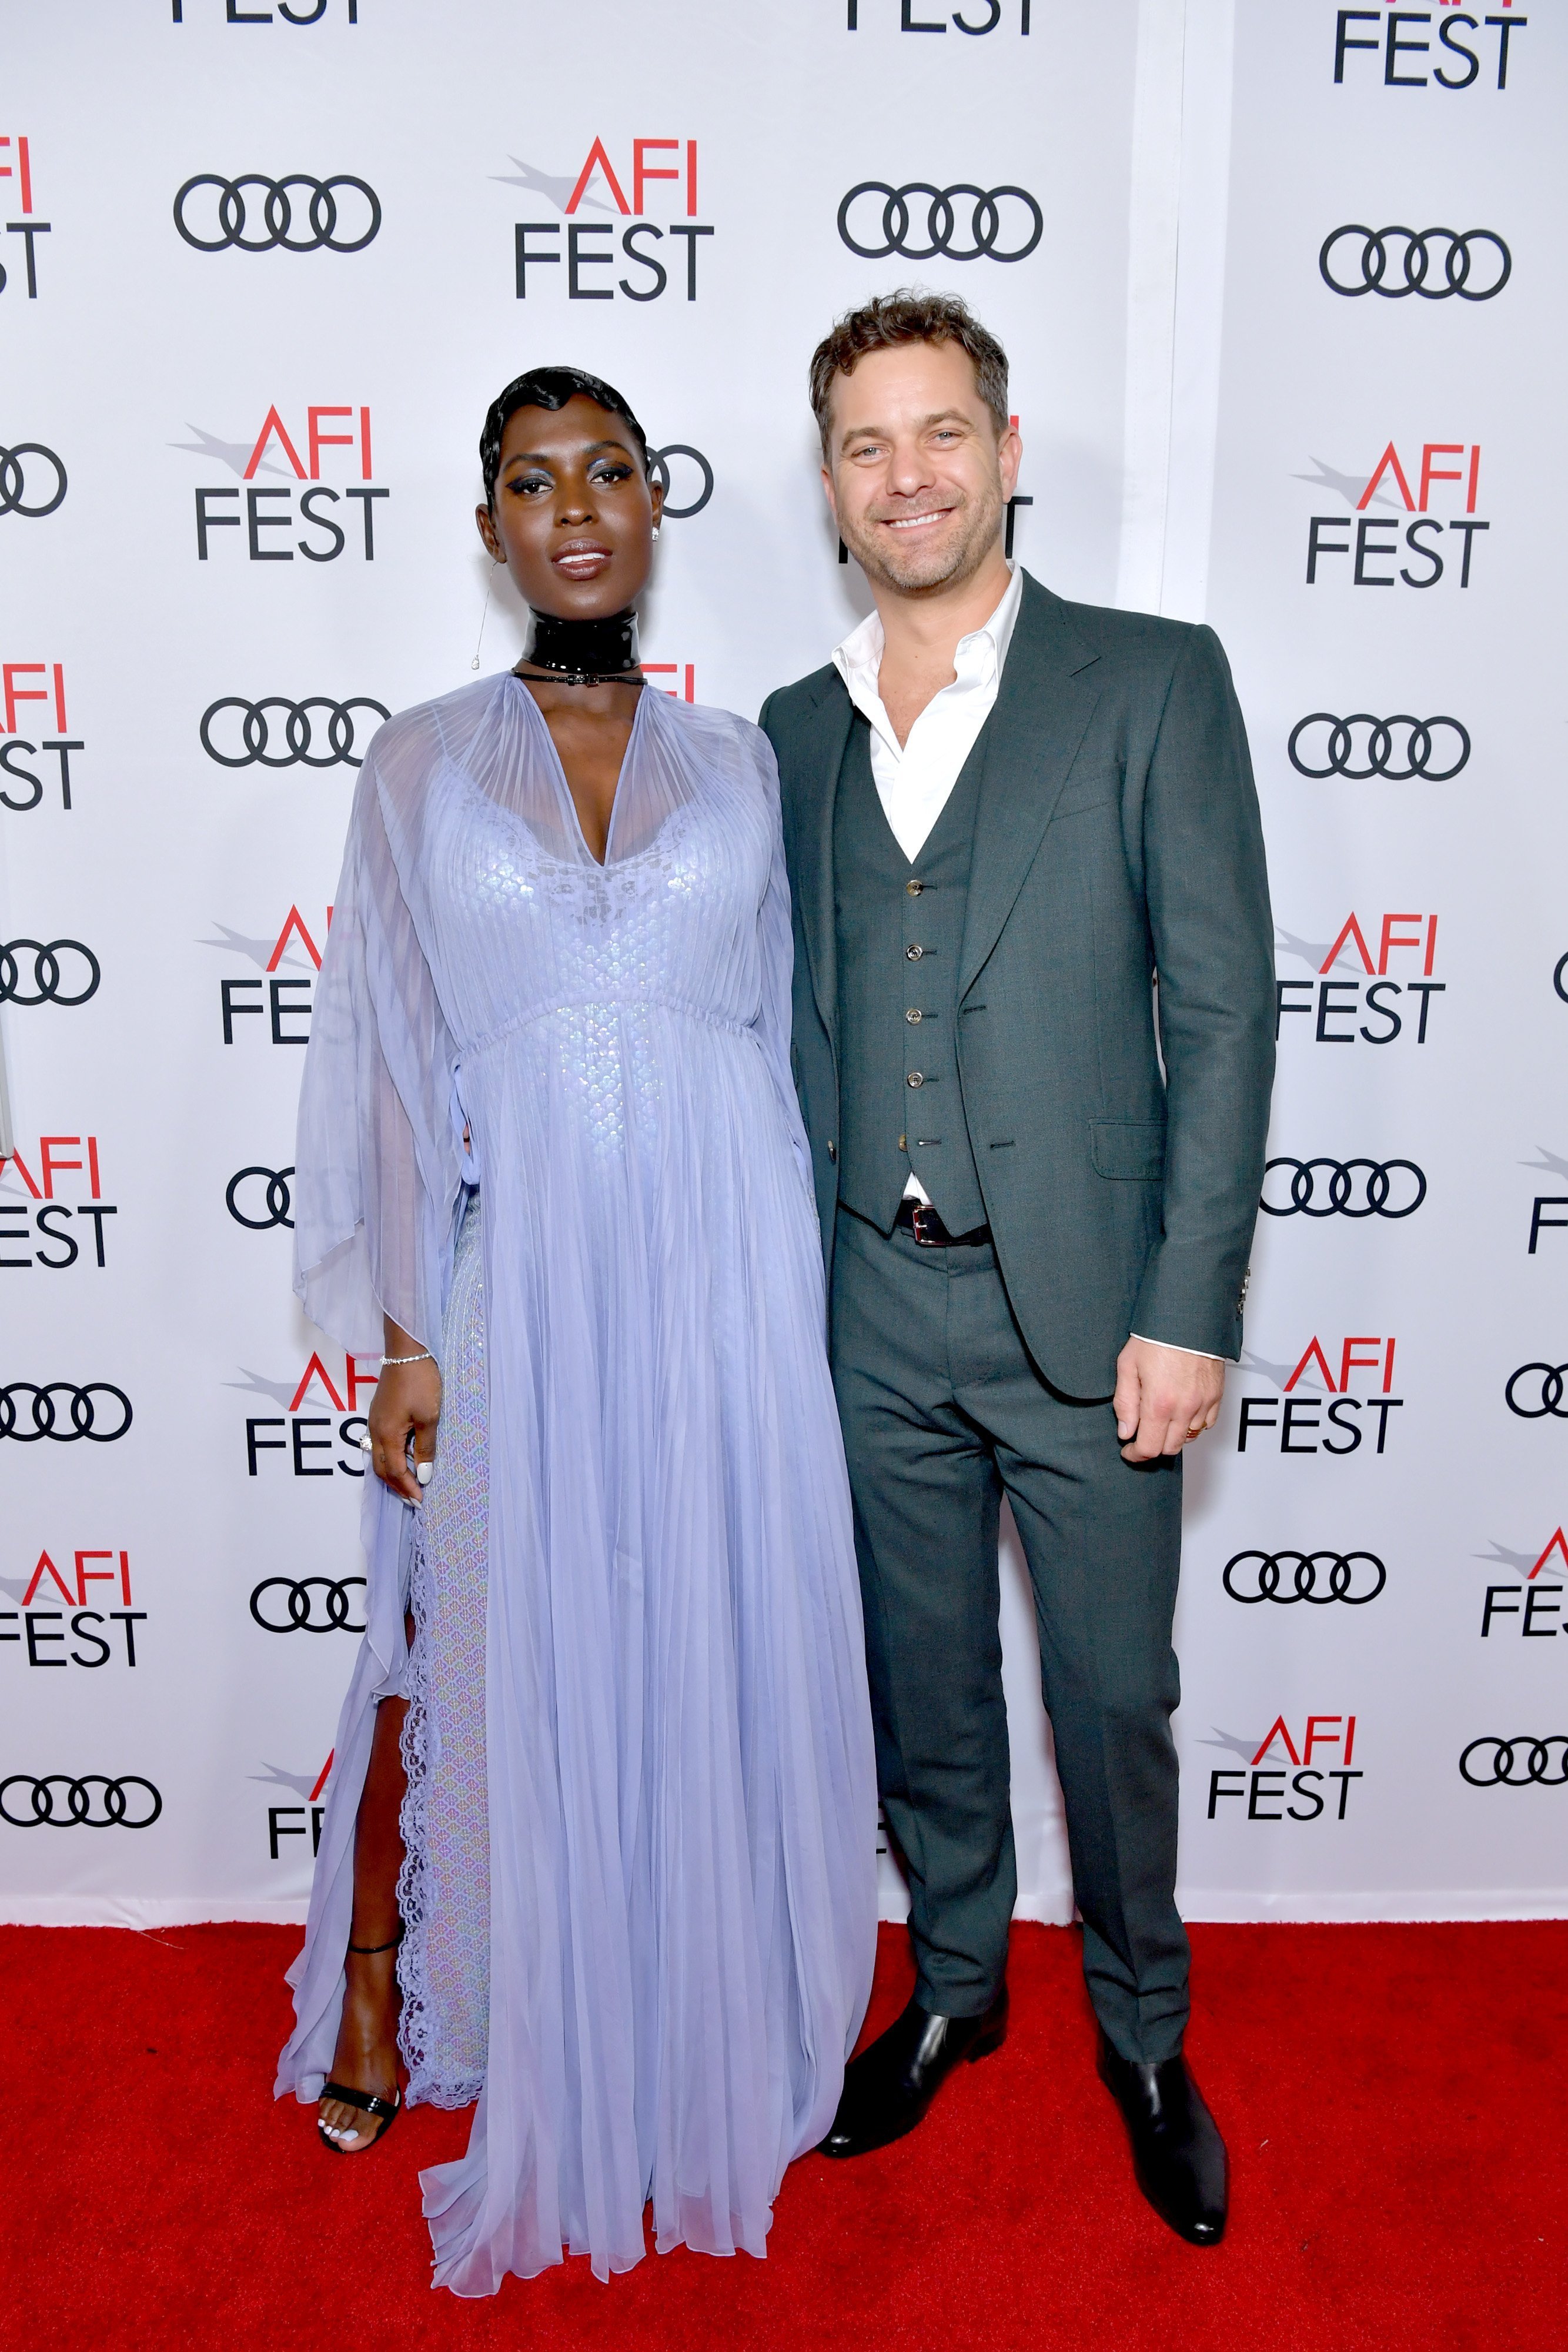 Joshua Jackson and Jodie Turner-Smith at the premiere of "Queen & Slim" on November 14, 2019. | Photo: Getty Images